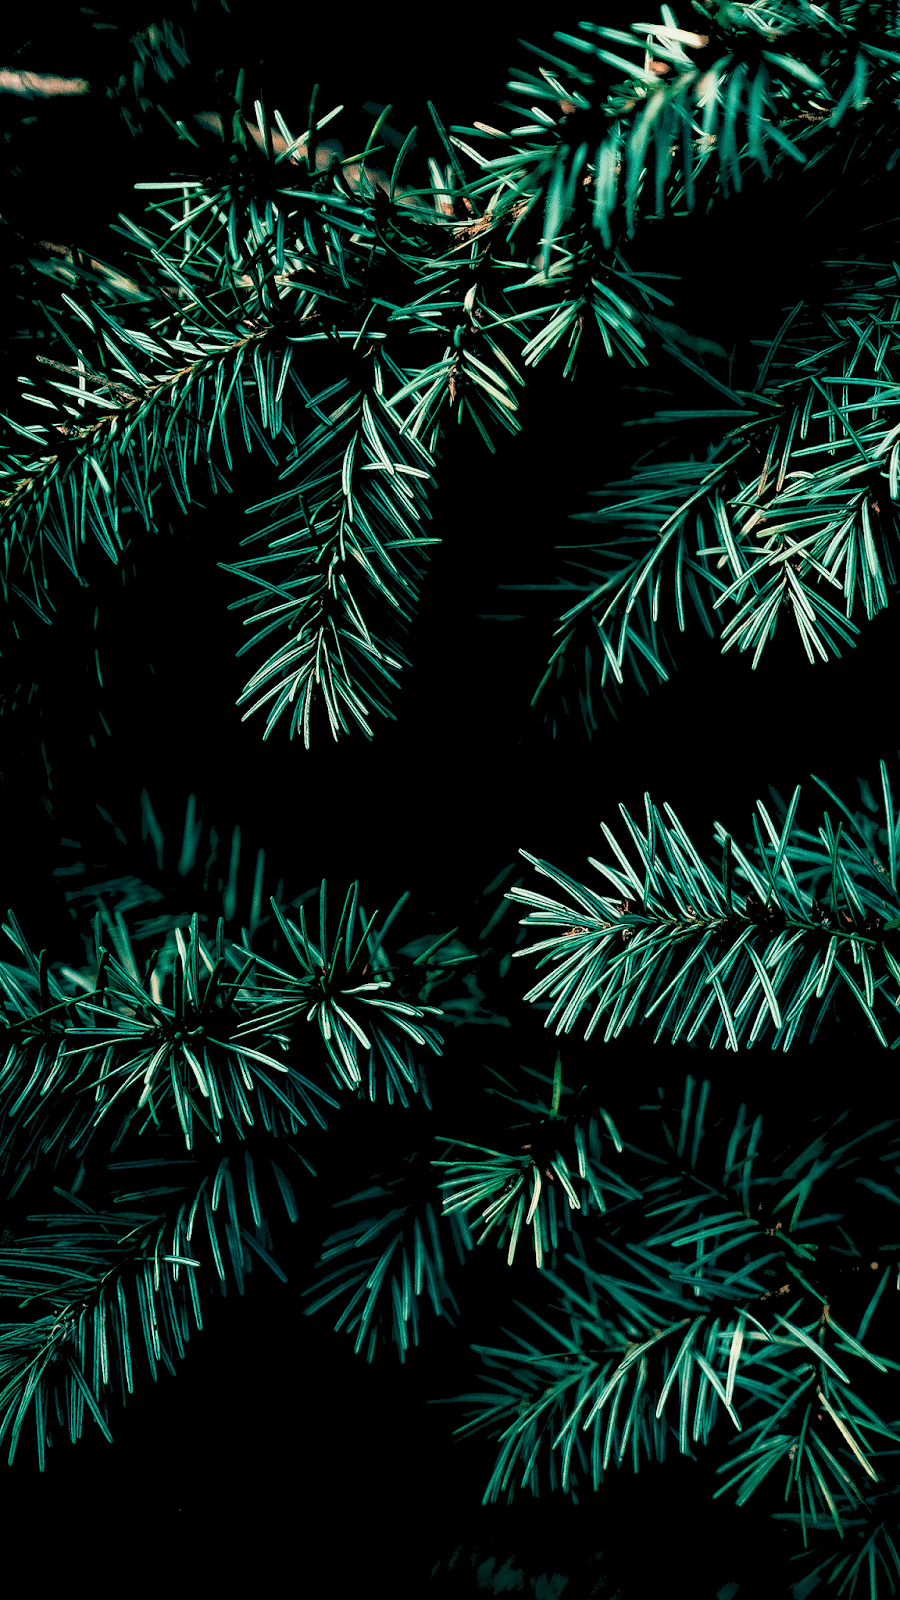 Christmas vibe for Amoled display #wallpaper #iphone #android #background #followme. Wallpaper iphone christmas, Preppy wallpaper, Tree wallpaper